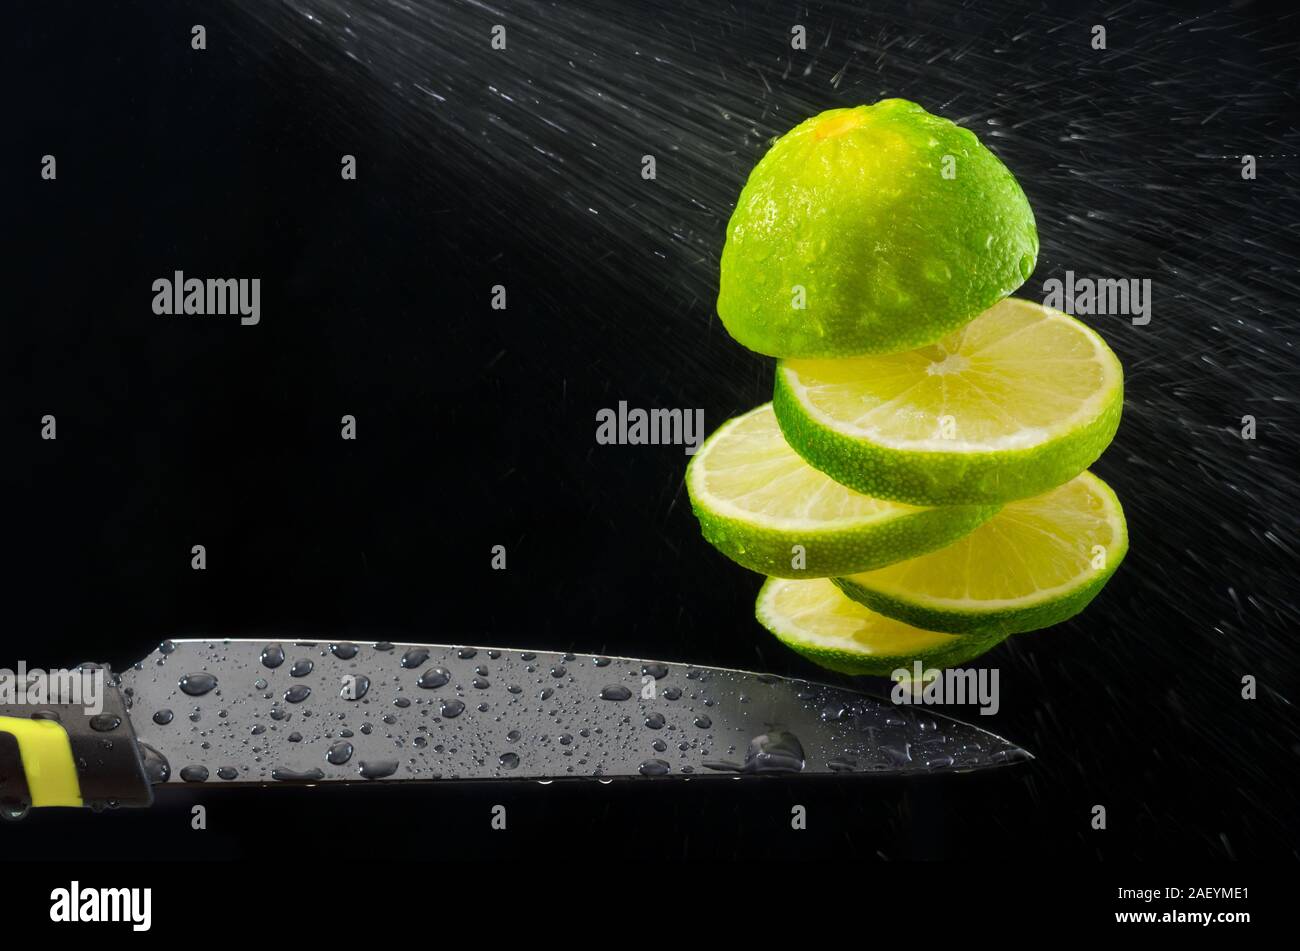 Wash and slice the lime on the fly. Stock Photo